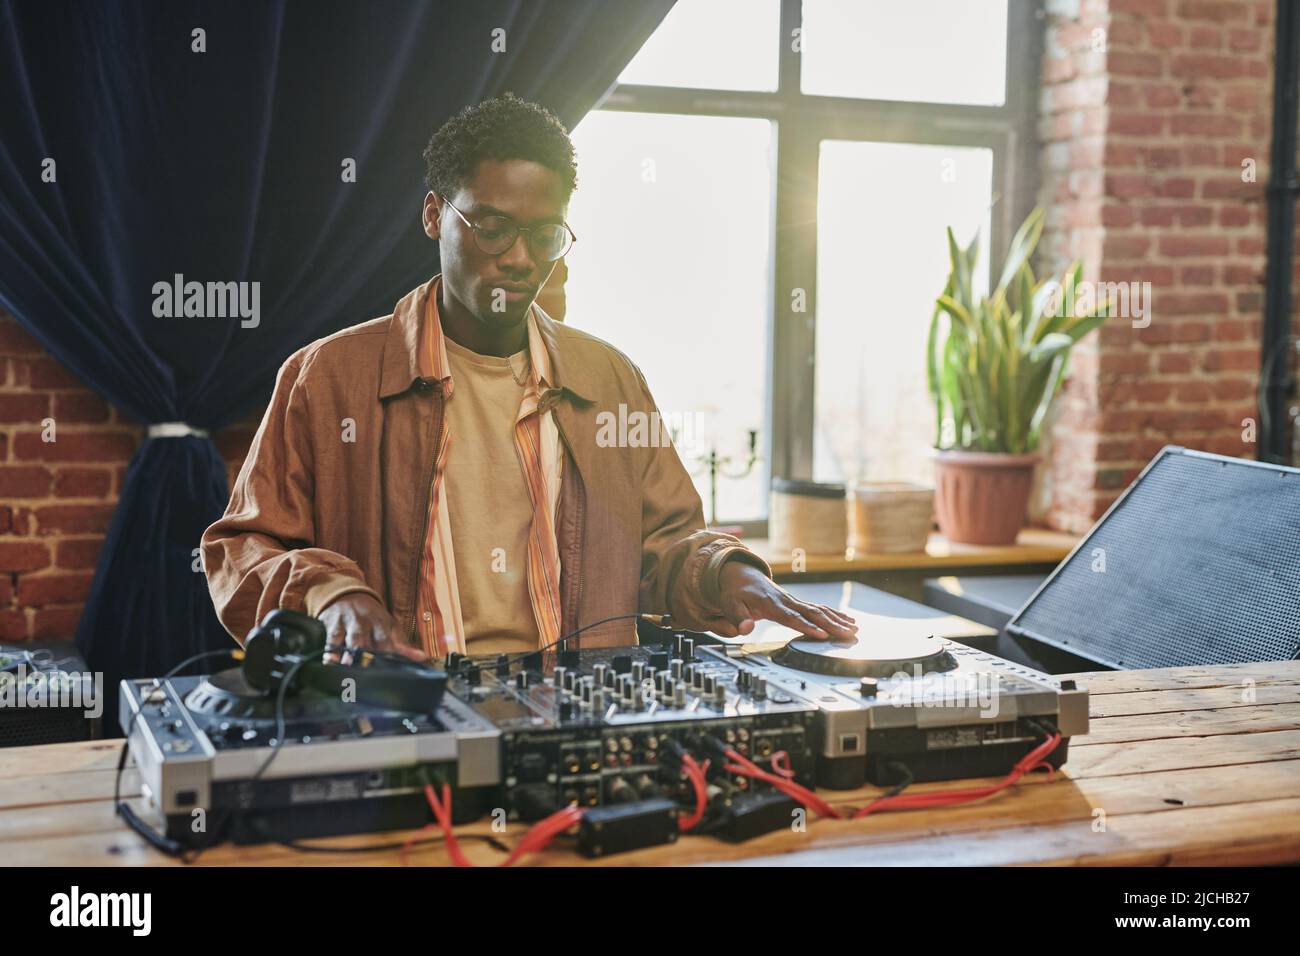 Young serious black man looking at dj board while adjustic musical equipment and touching turntables before performing Stock Photo